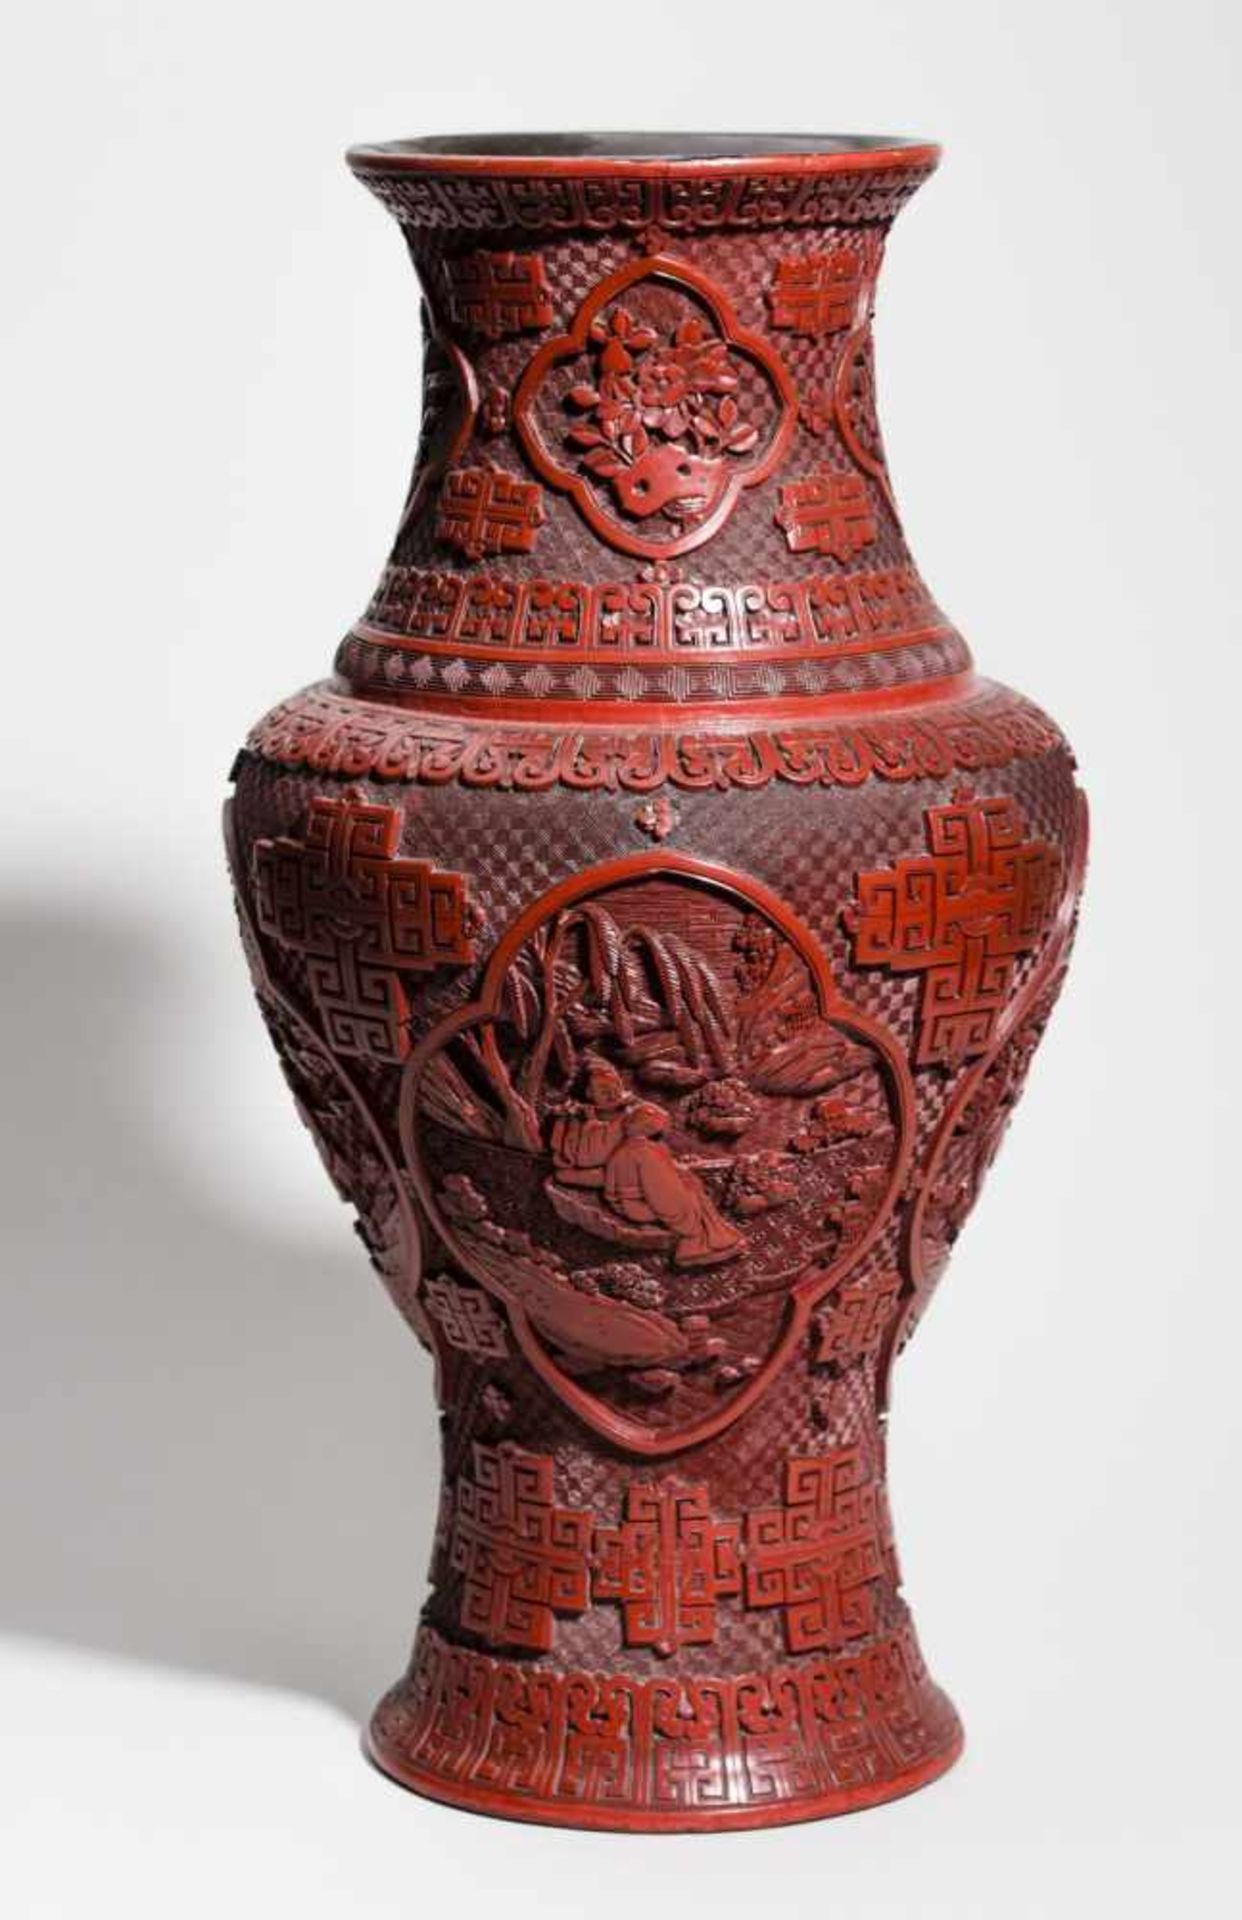 LARGE VASE WITH SCHOLARS IN THE COUNTRYSIDE Carved red lacquer. China, Qing Dynasty, 19th cent. - Image 2 of 4